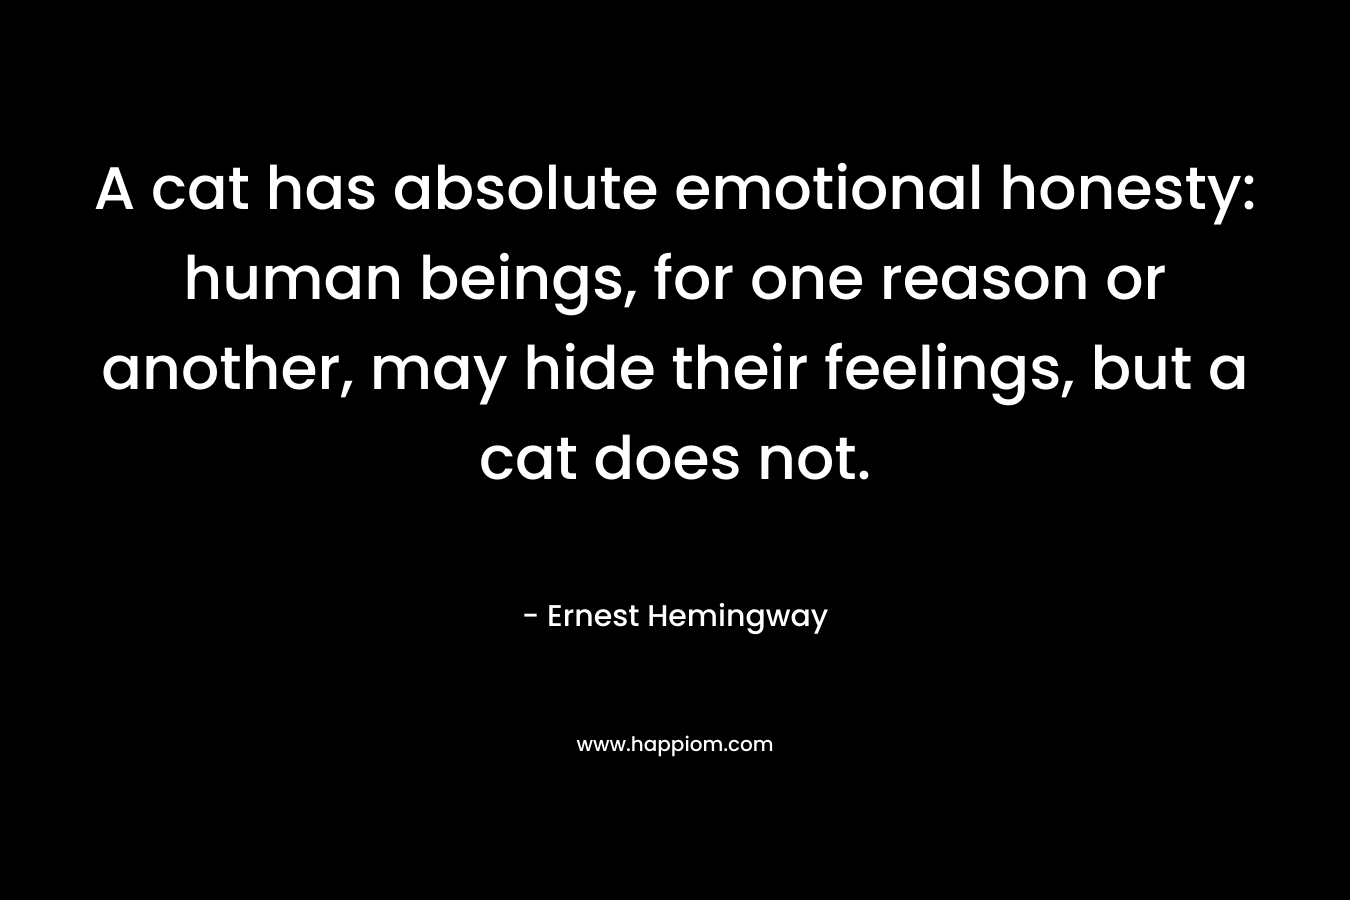 A cat has absolute emotional honesty: human beings, for one reason or another, may hide their feelings, but a cat does not. – Ernest Hemingway